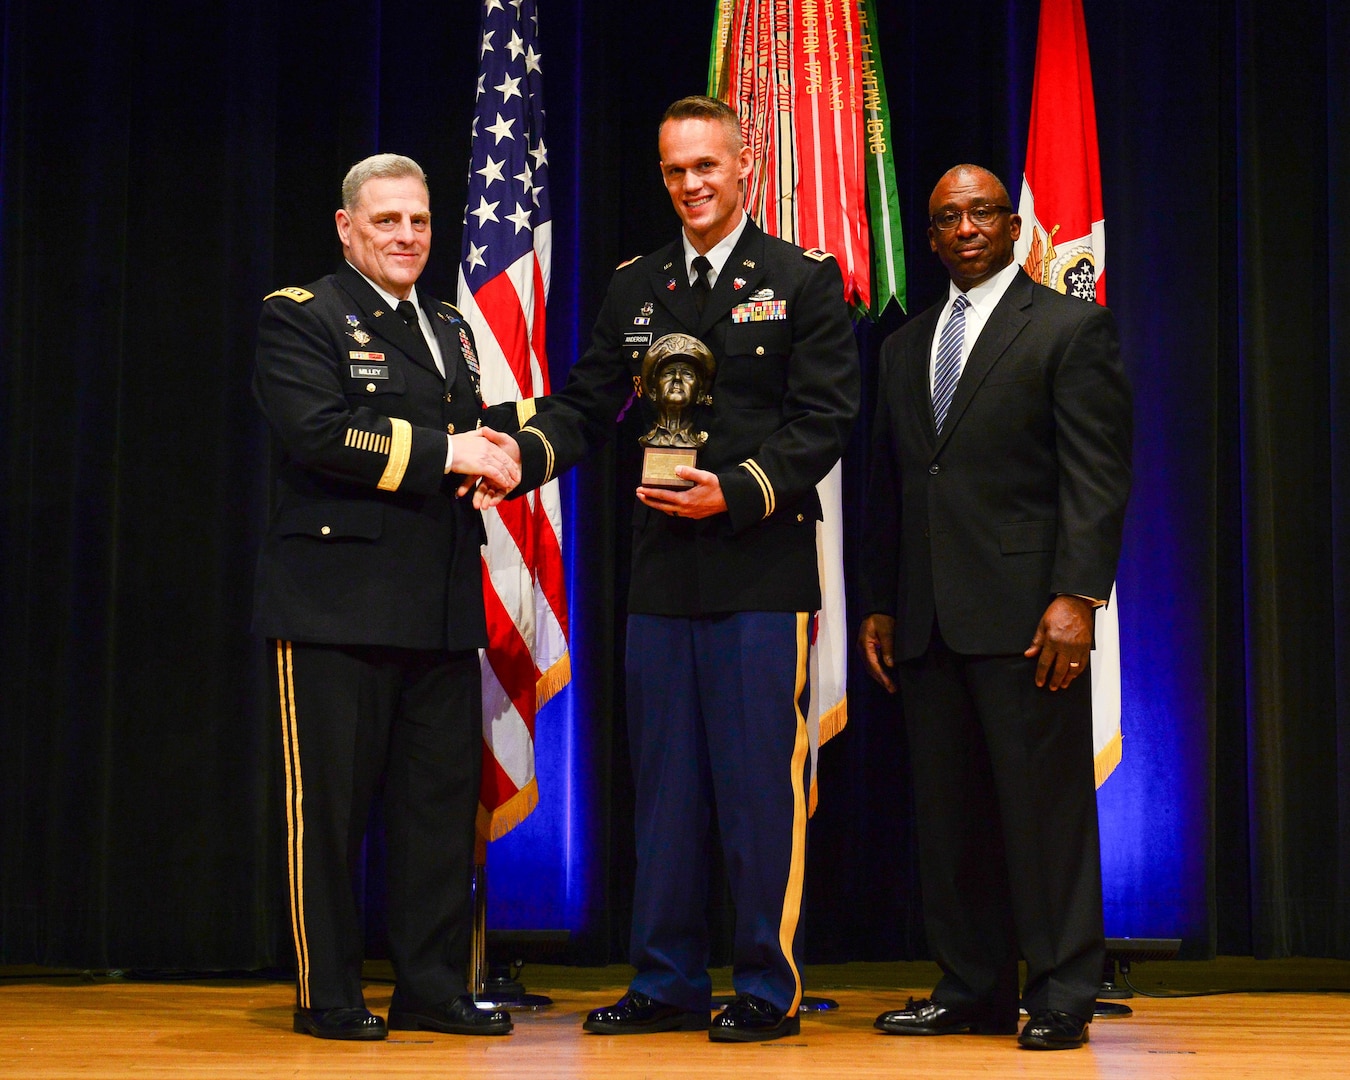 Chief Warrant Officer 2 Ryan Anderson of the California National Guard receives the prestigious MacArthur Leadership Award from Chief of Staff of the Army Gen. Mark A. Milley and James Wofford of the Gen. MacArthur Foundation at the Pentagon on June 1. The award is presented annually to one National Guard warrant officer and 28 Army officers overall nationwide who exemplify the ideals for which Gen. Douglas MacArthur stood: duty, honor, country.